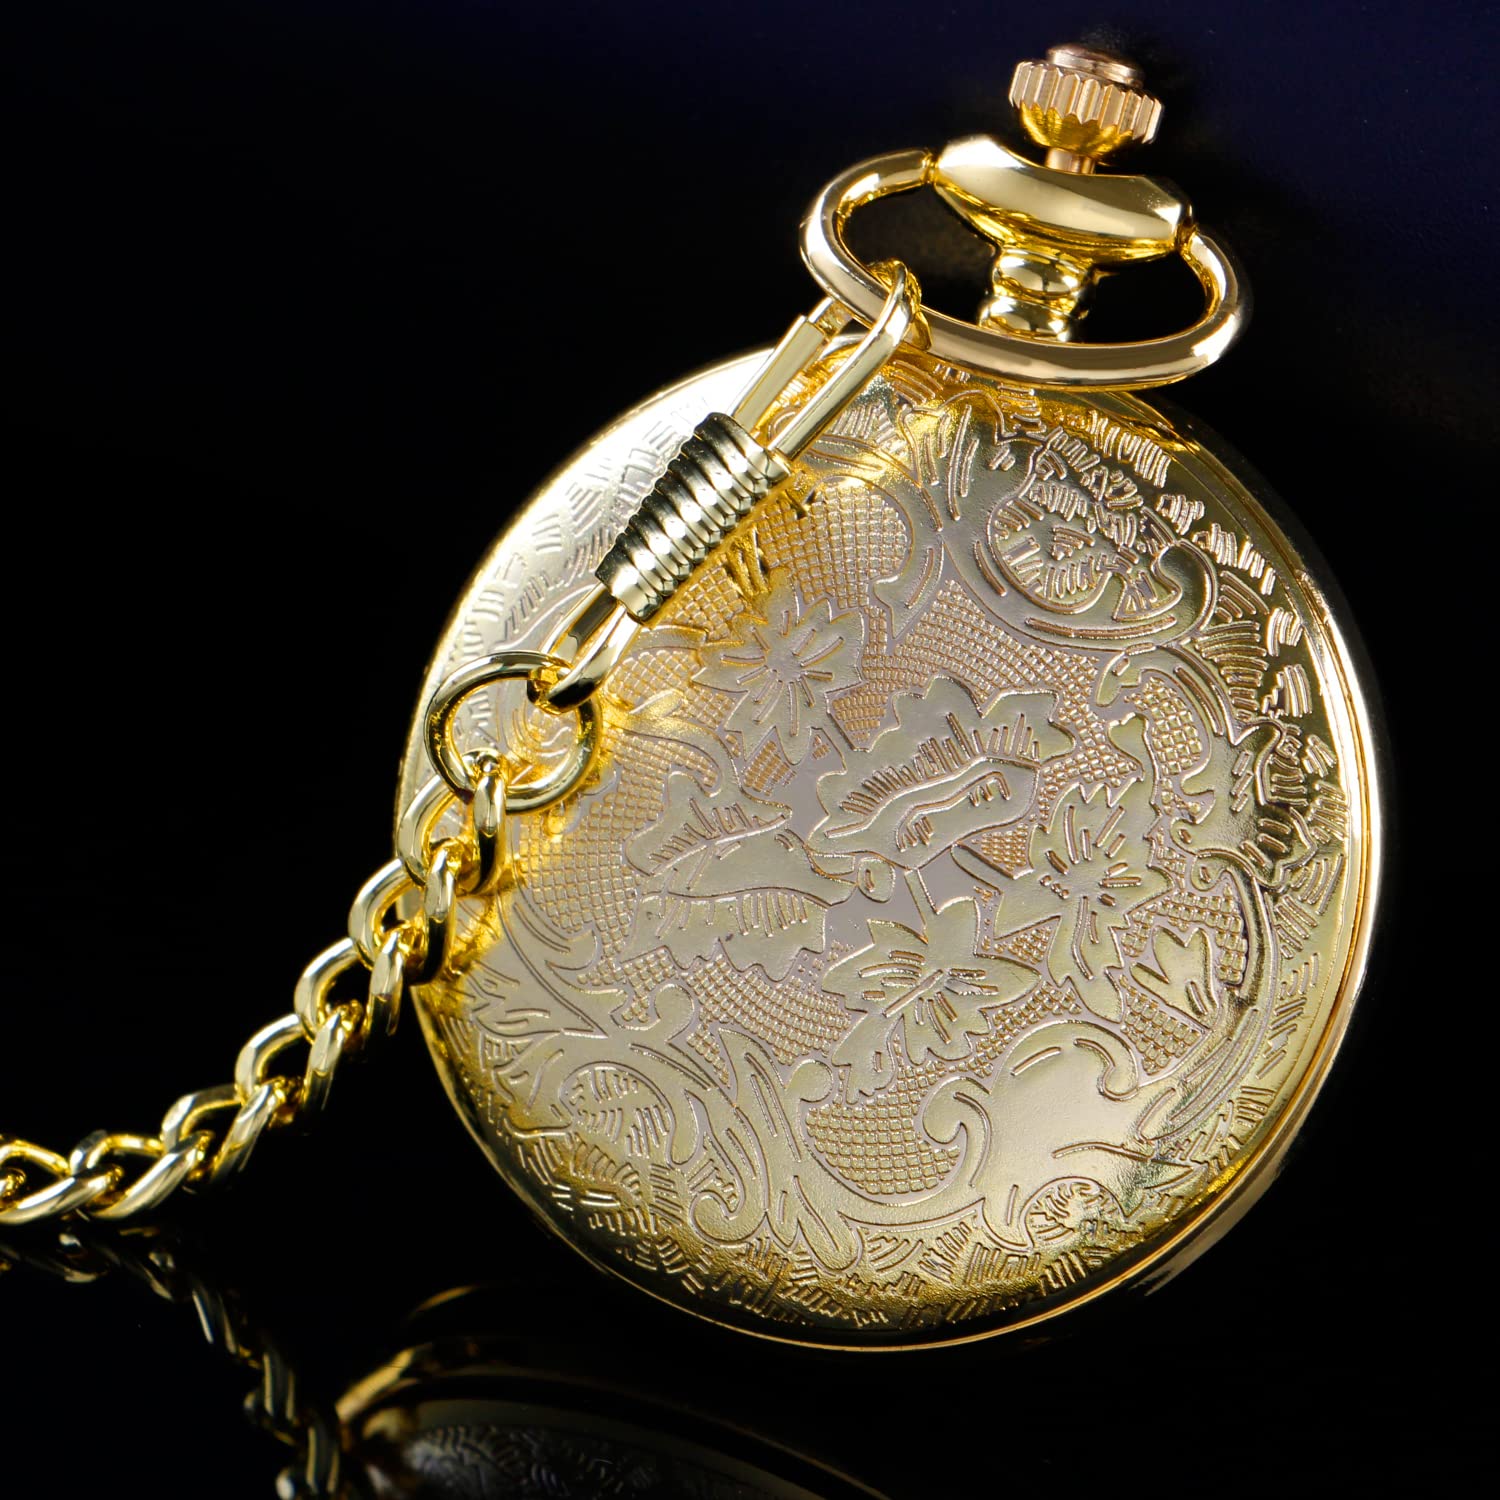 Realpoo Both Sides Gold Carved Flower Quartz Pocket Watch Quartz Movement, Quartz Pocket Watches with Chain Clip for Men-Gold